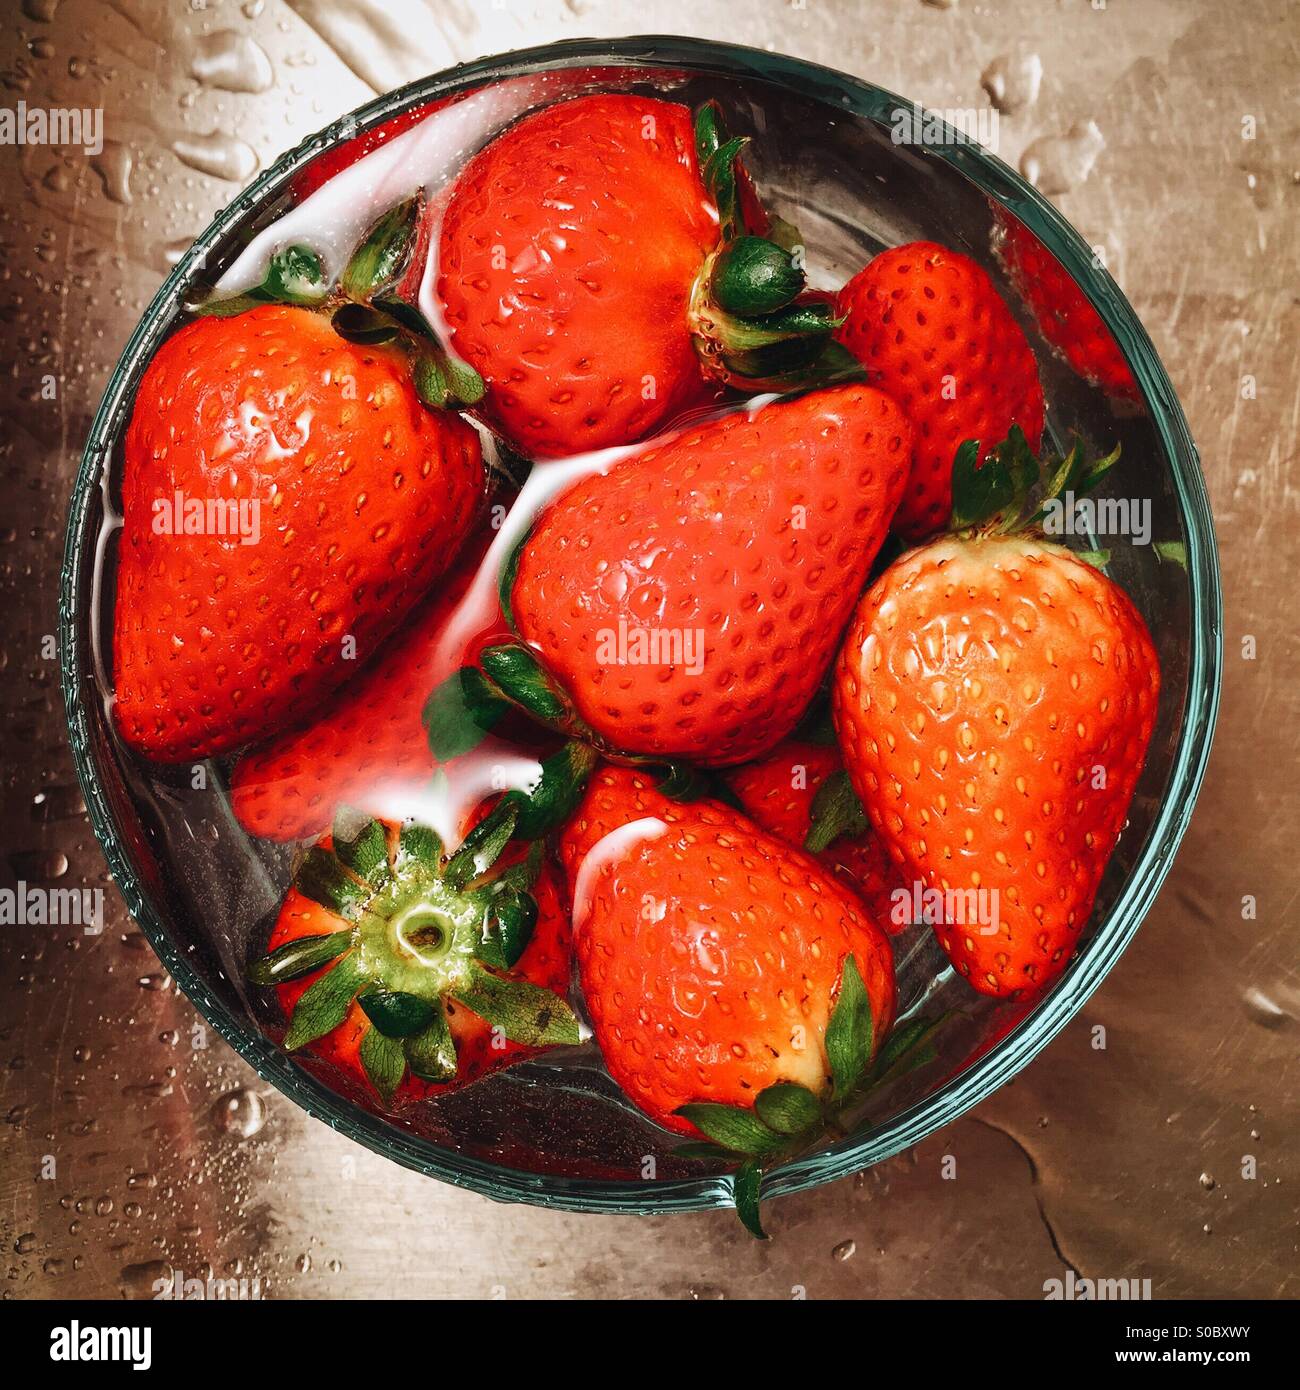 As small bowl full of organic strawberries being washed in a stainless steel sink. Stock Photo